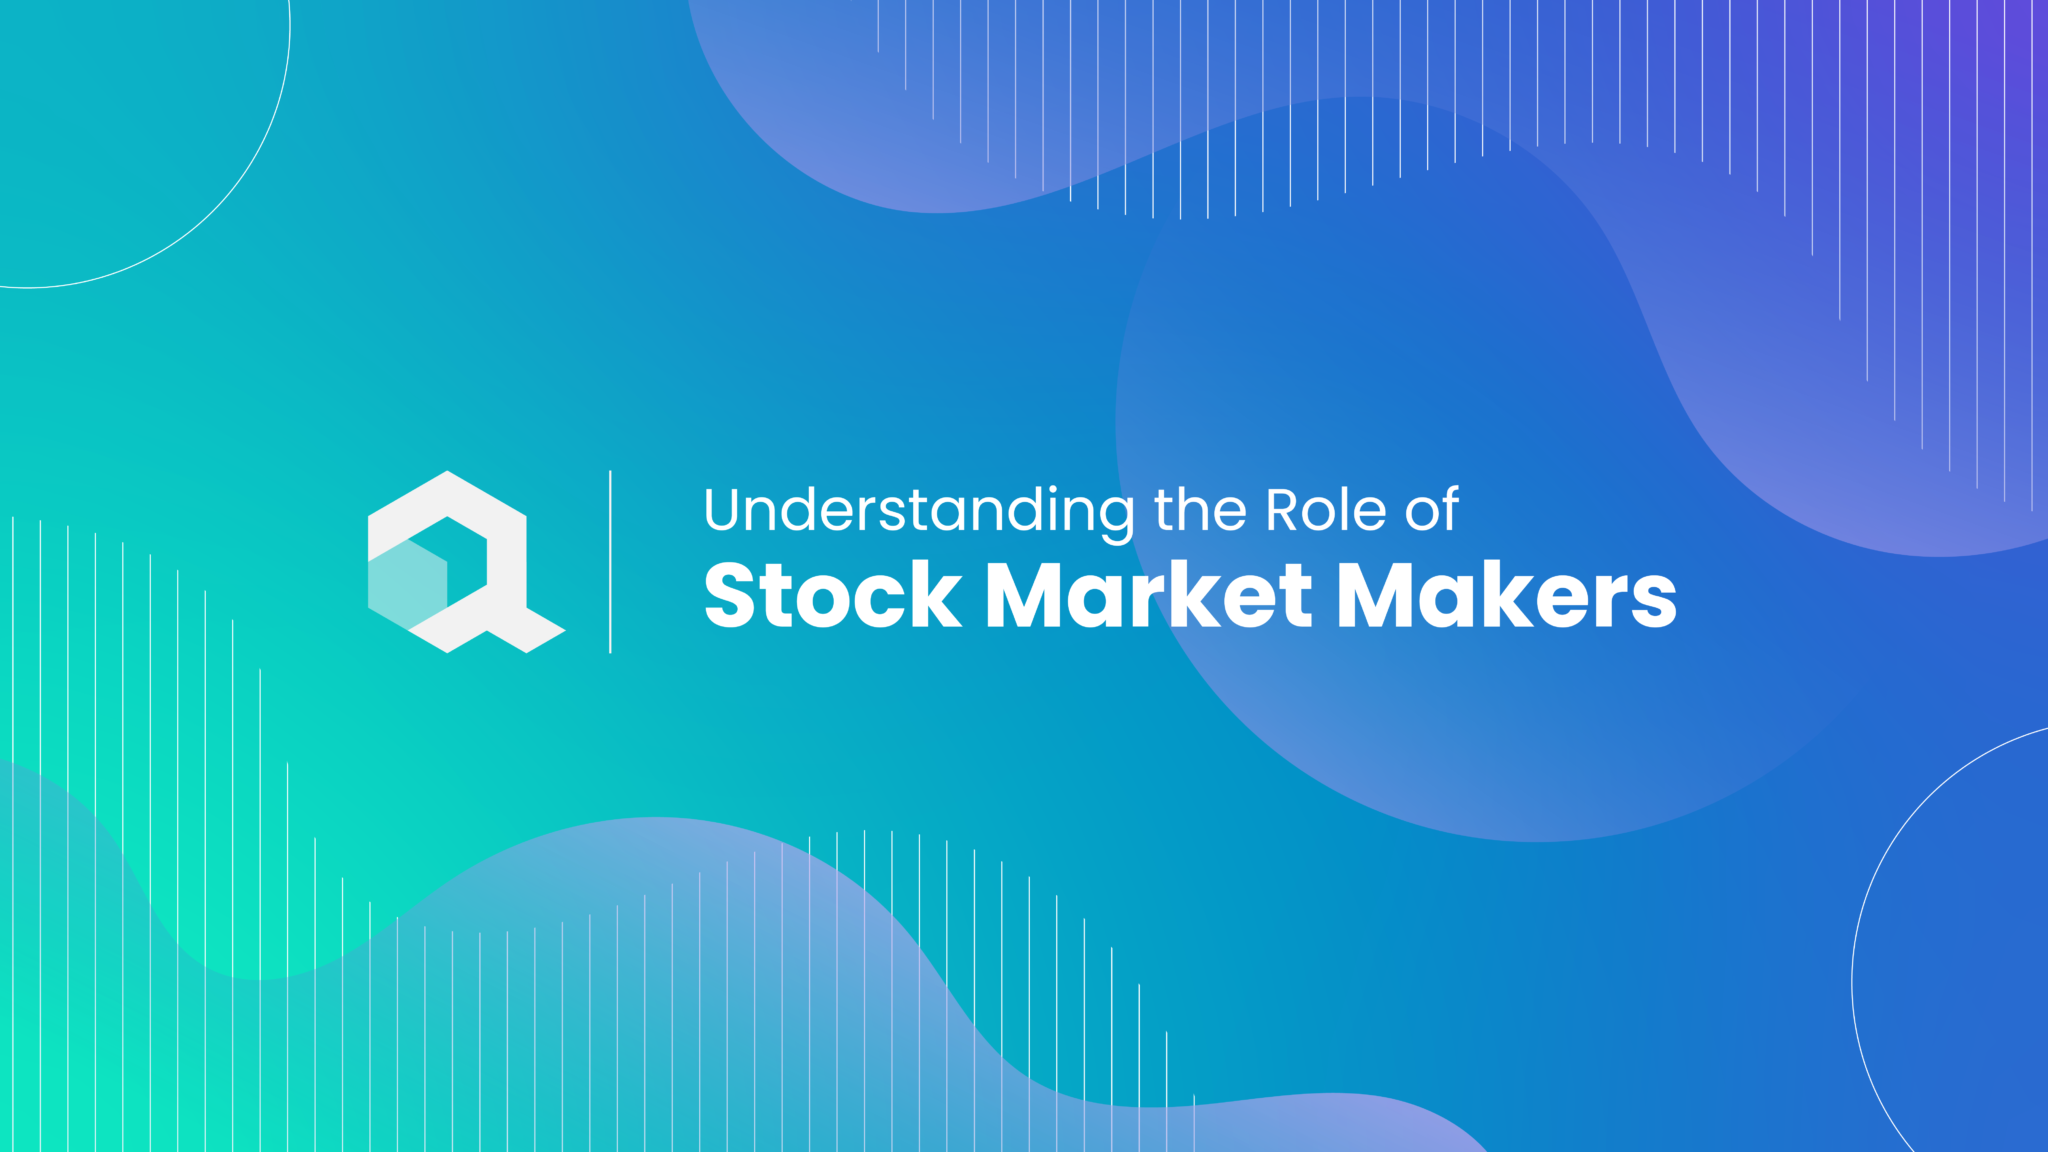 Stock Market Makers: The Role in Trading